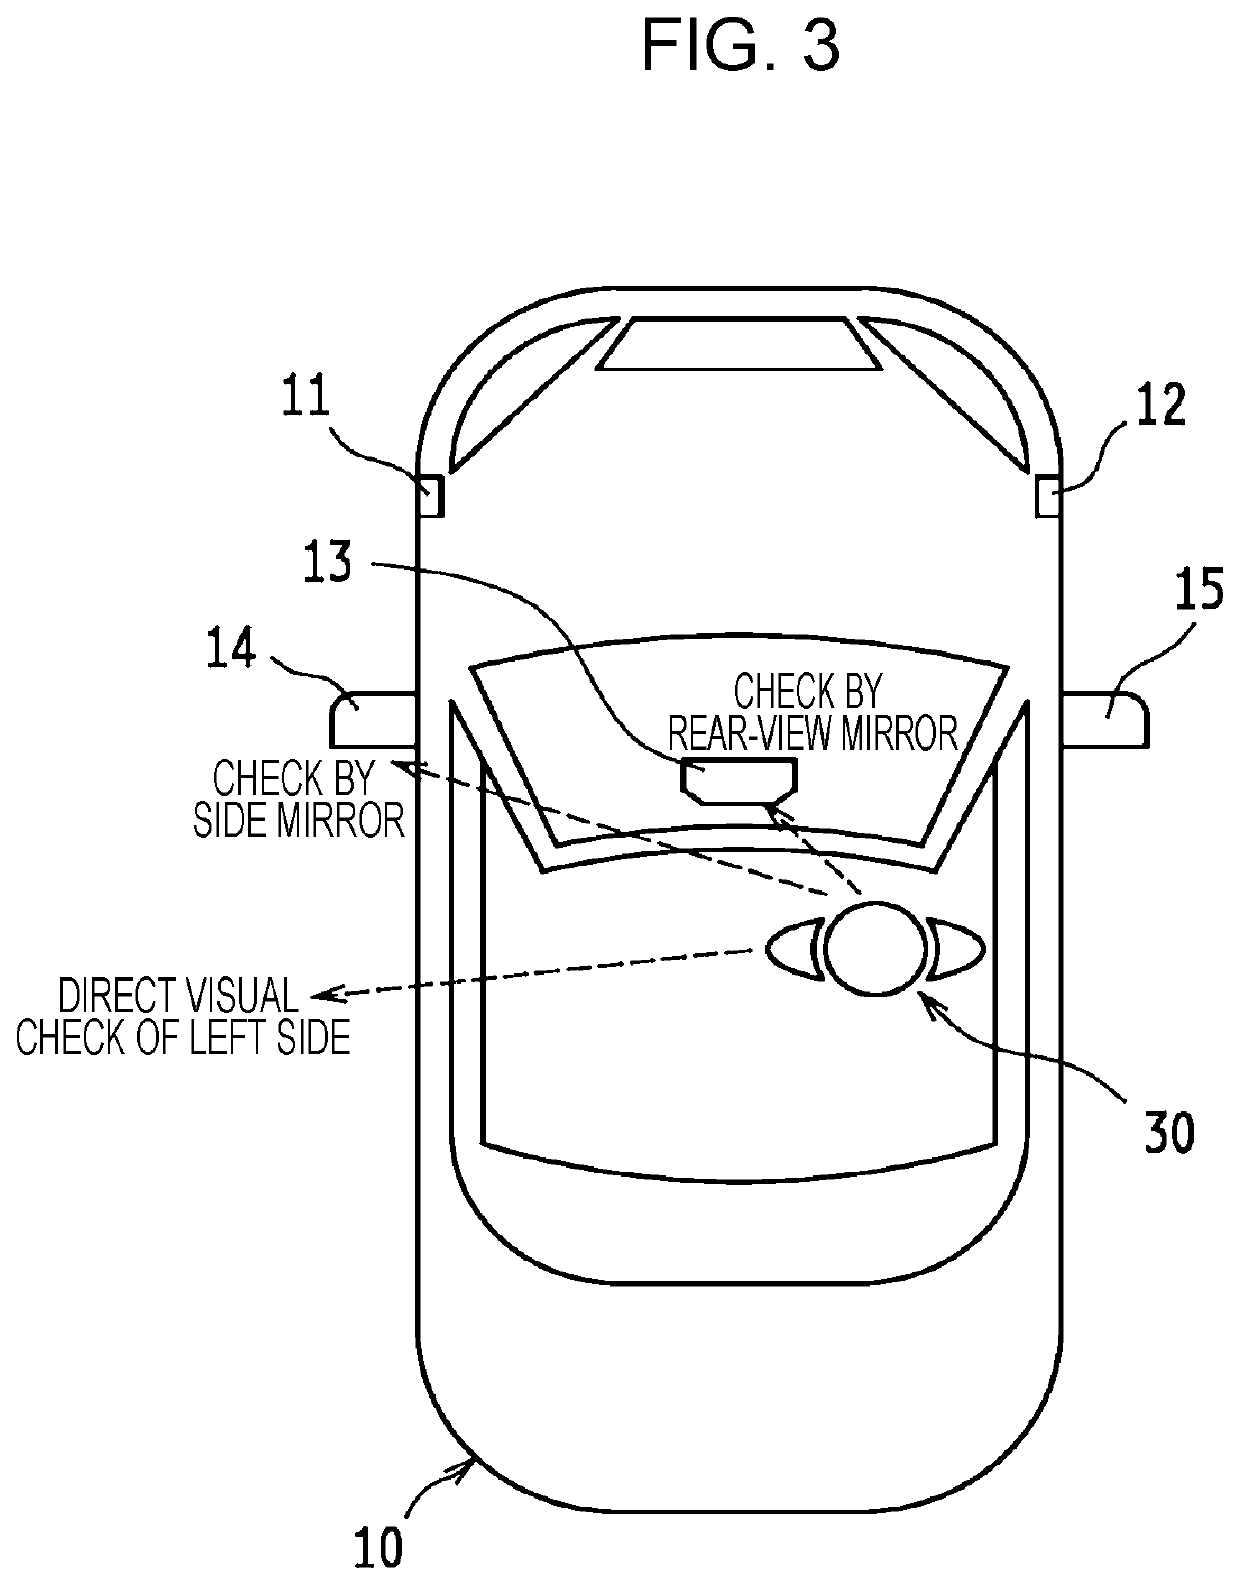 Driver monitoring device